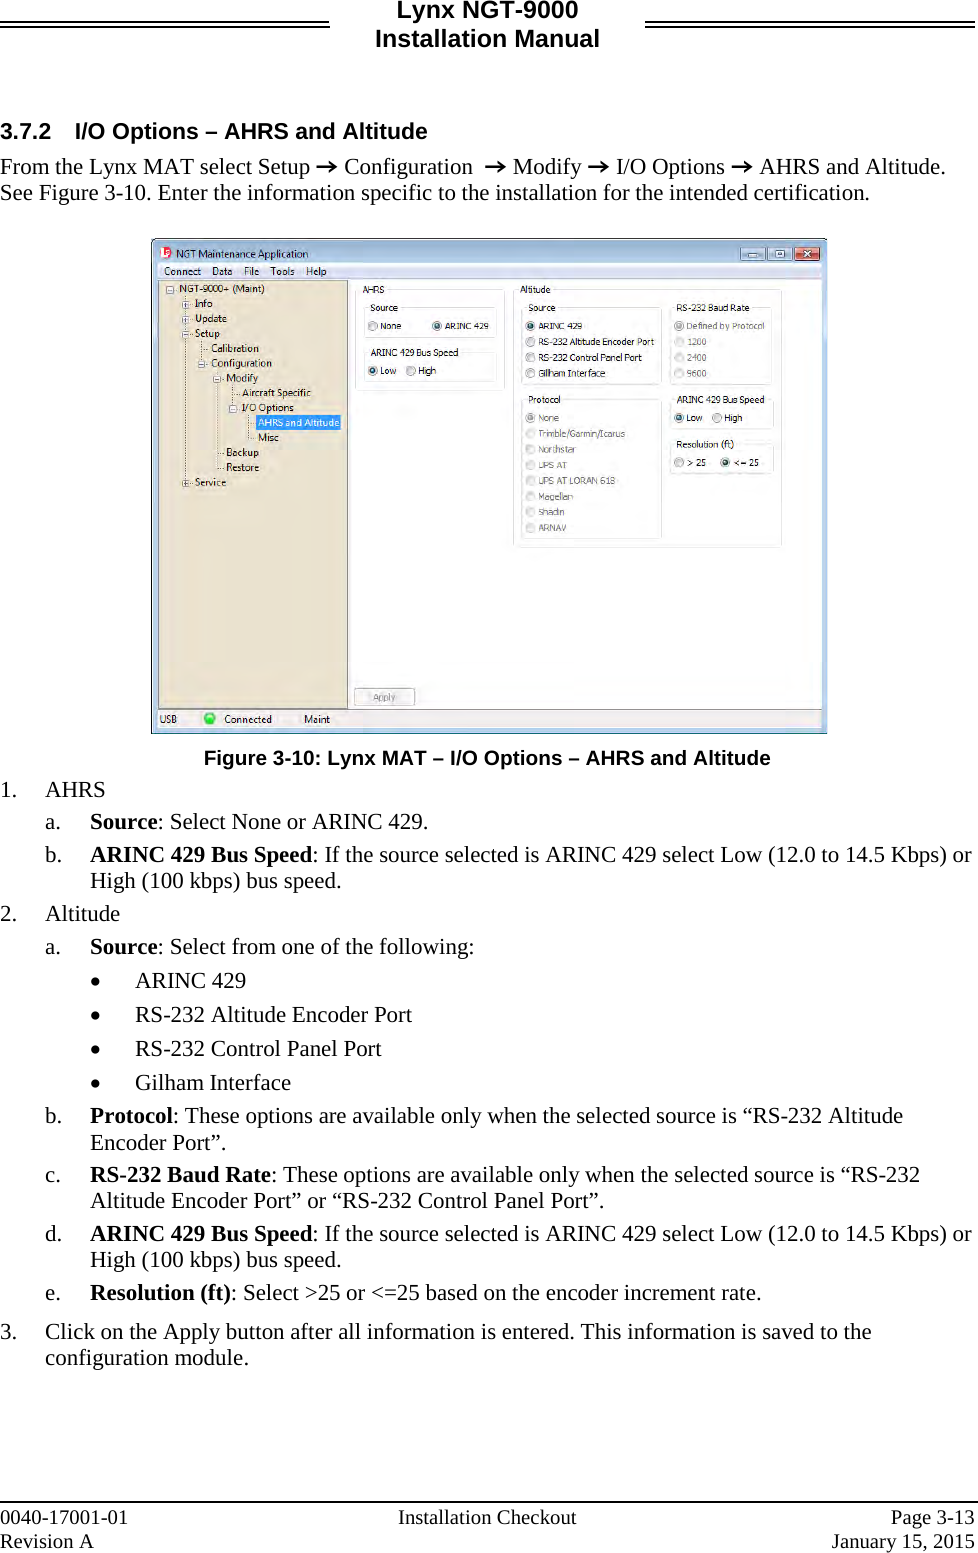 Lynx NGT-9000 Installation Manual   3.7.2 I/O Options – AHRS and Altitude From the Lynx MAT select Setup Z Configuration  Z Modify Z I/O Options Z AHRS and Altitude. See Figure 3-10. Enter the information specific to the installation for the intended certification.     Figure 3-10: Lynx MAT – I/O Options – AHRS and Altitude 1. AHRS a. Source: Select None or ARINC 429. b. ARINC 429 Bus Speed: If the source selected is ARINC 429 select Low (12.0 to 14.5 Kbps) or High (100 kbps) bus speed.  2. Altitude a. Source: Select from one of the following:  • ARINC 429 • RS-232 Altitude Encoder Port • RS-232 Control Panel Port • Gilham Interface b. Protocol: These options are available only when the selected source is “RS-232 Altitude Encoder Port”.  c. RS-232 Baud Rate: These options are available only when the selected source is “RS-232 Altitude Encoder Port” or “RS-232 Control Panel Port”. d. ARINC 429 Bus Speed: If the source selected is ARINC 429 select Low (12.0 to 14.5 Kbps) or High (100 kbps) bus speed. e. Resolution (ft): Select &gt;25 or &lt;=25 based on the encoder increment rate.  3. Click on the Apply button after all information is entered. This information is saved to the configuration module.     0040-17001-01 Installation Checkout  Page 3-13 Revision A     January 15, 2015 